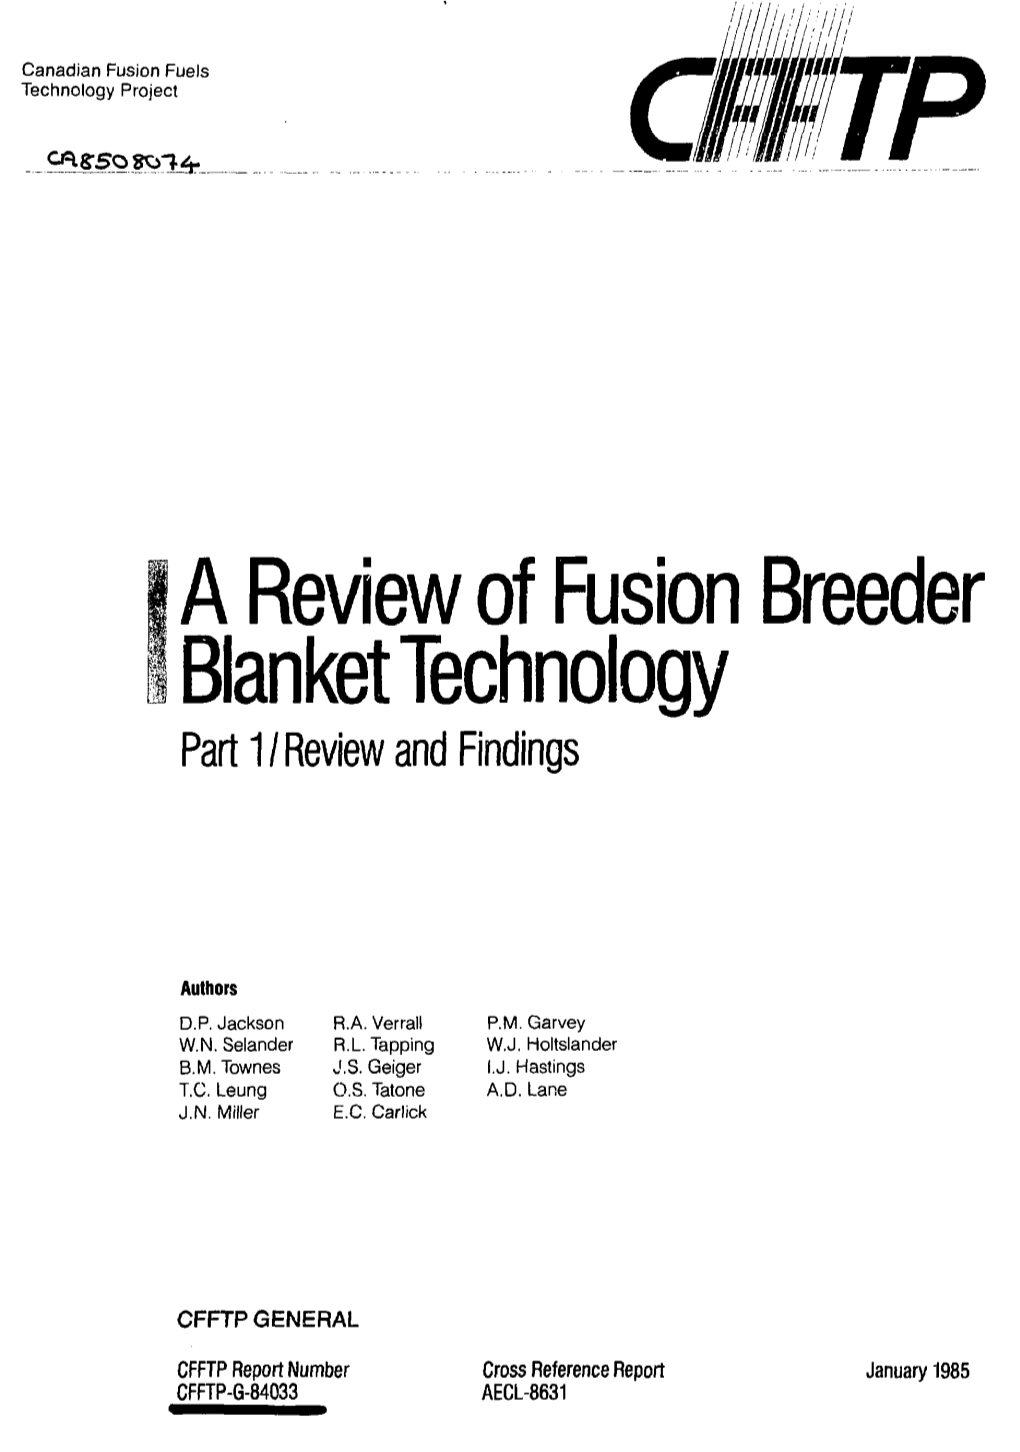 A Review of Fusion Breeder Blanket Technology Part 1 / Review and Findings